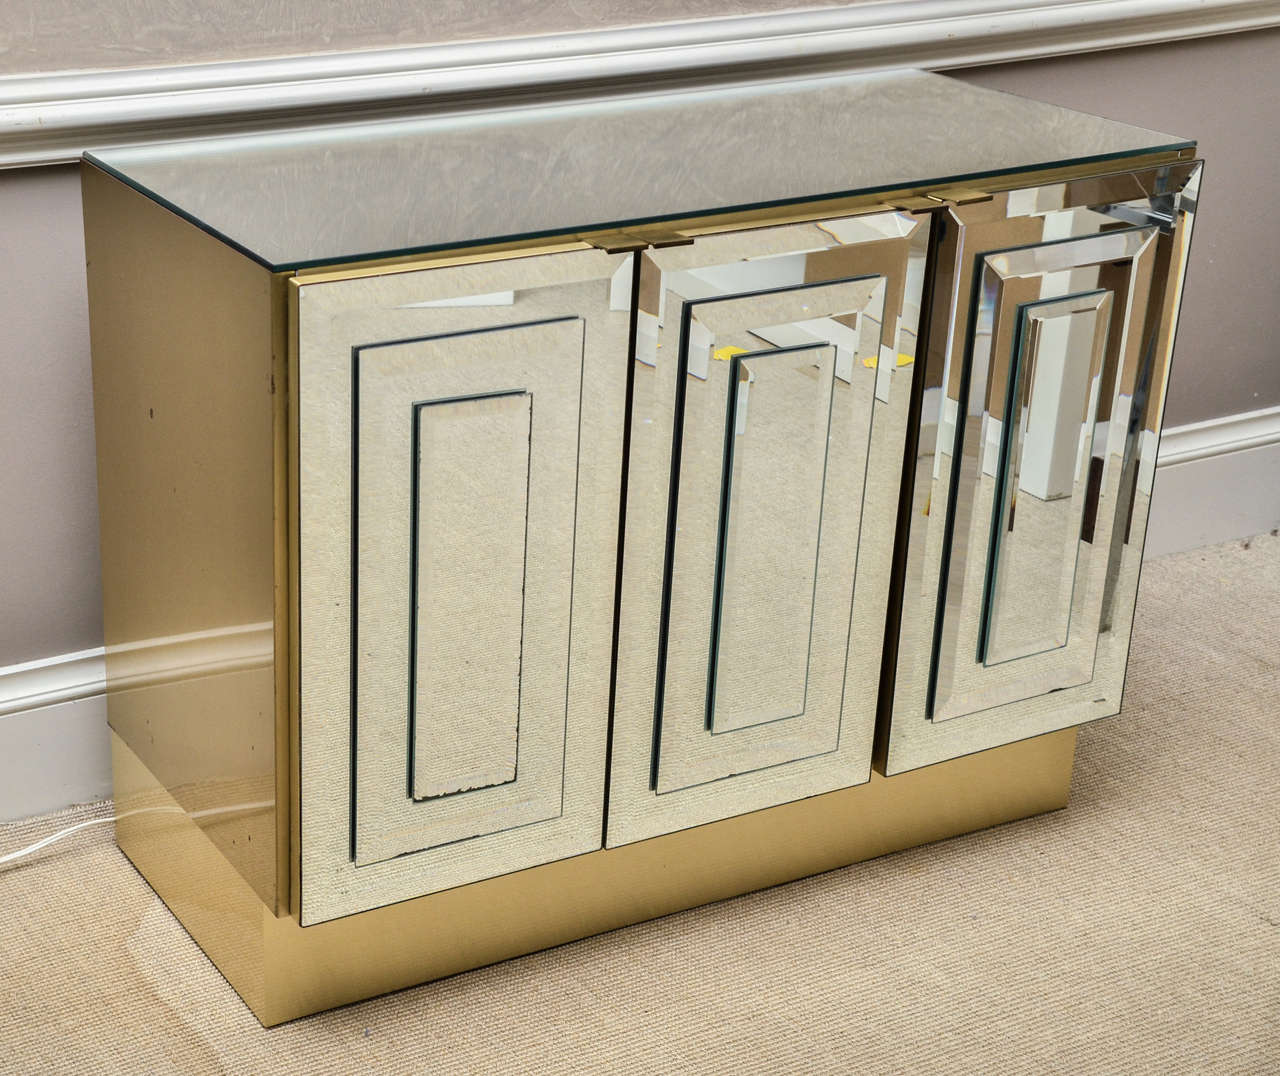 Attractive three-door mirrored buffet by Ello. The top and doors are mirrored. The sides and bottom are brass as are the door pulls.